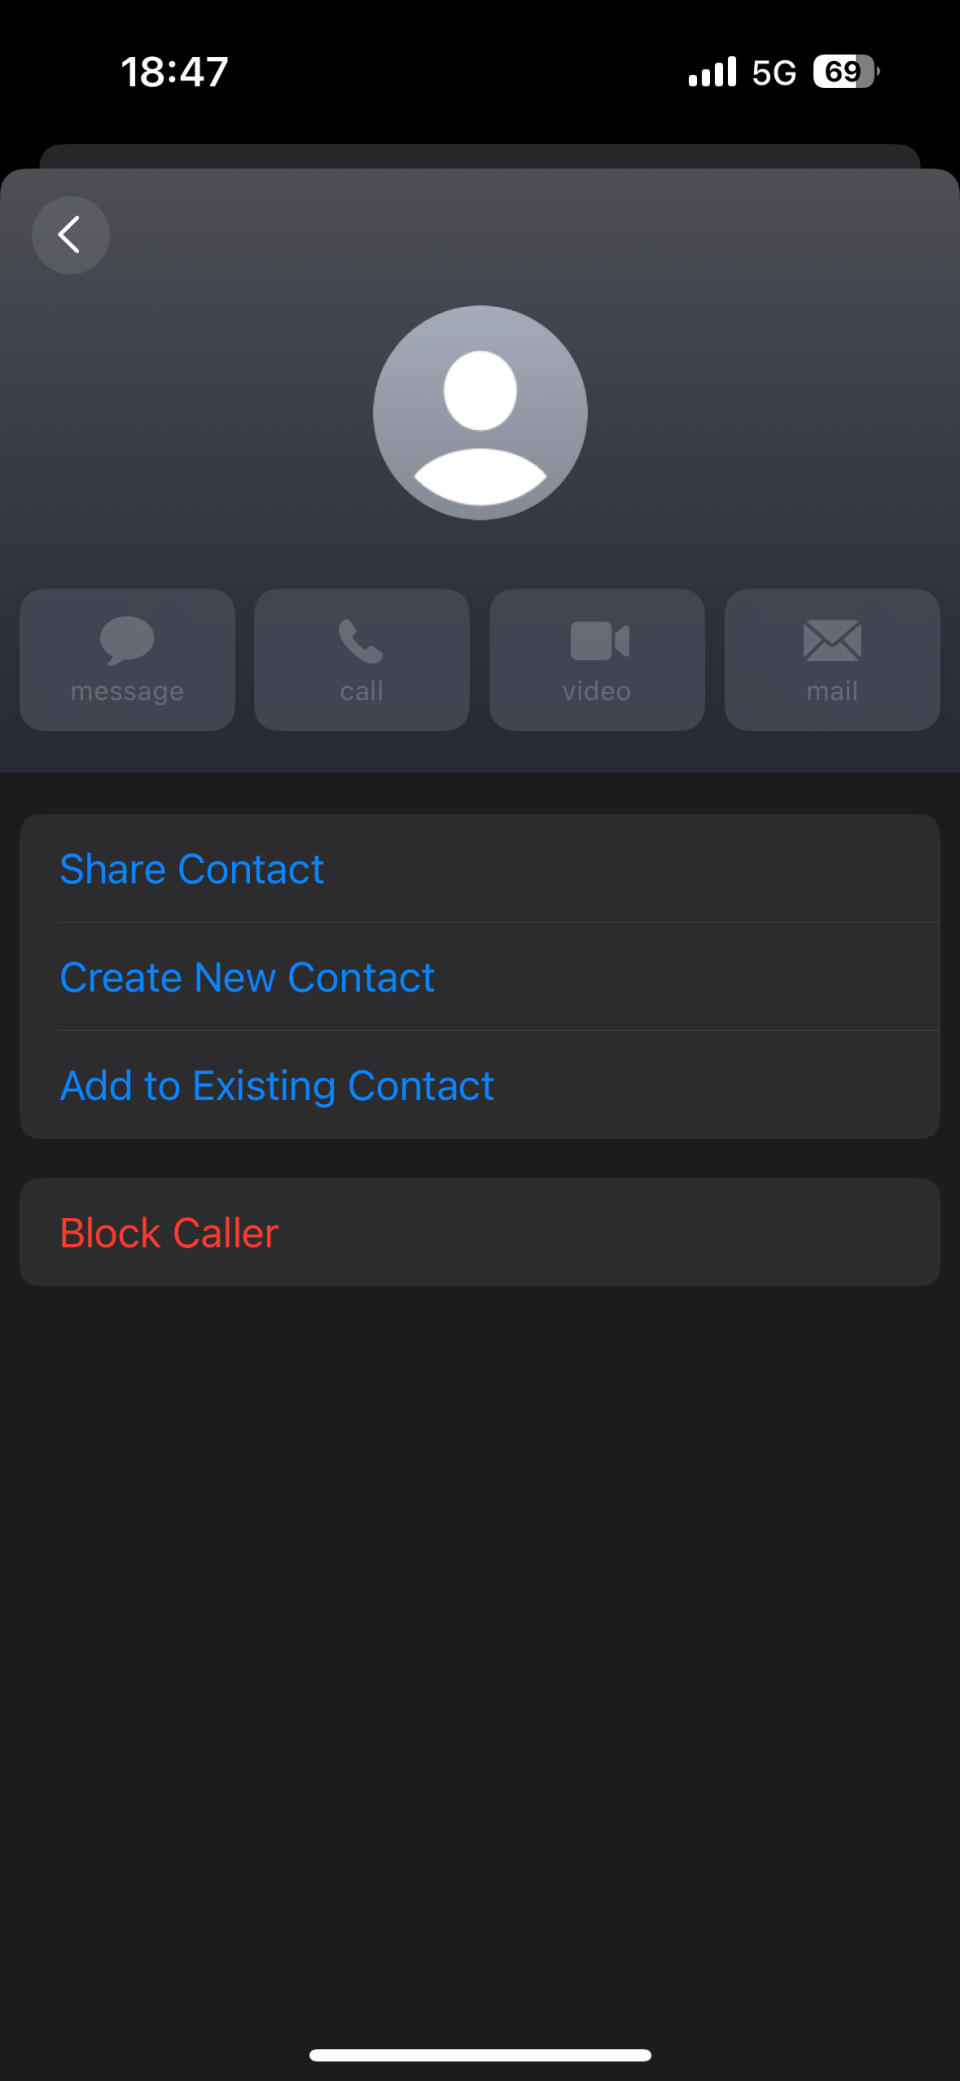 The contact can't be blocked (Yahoo News) 